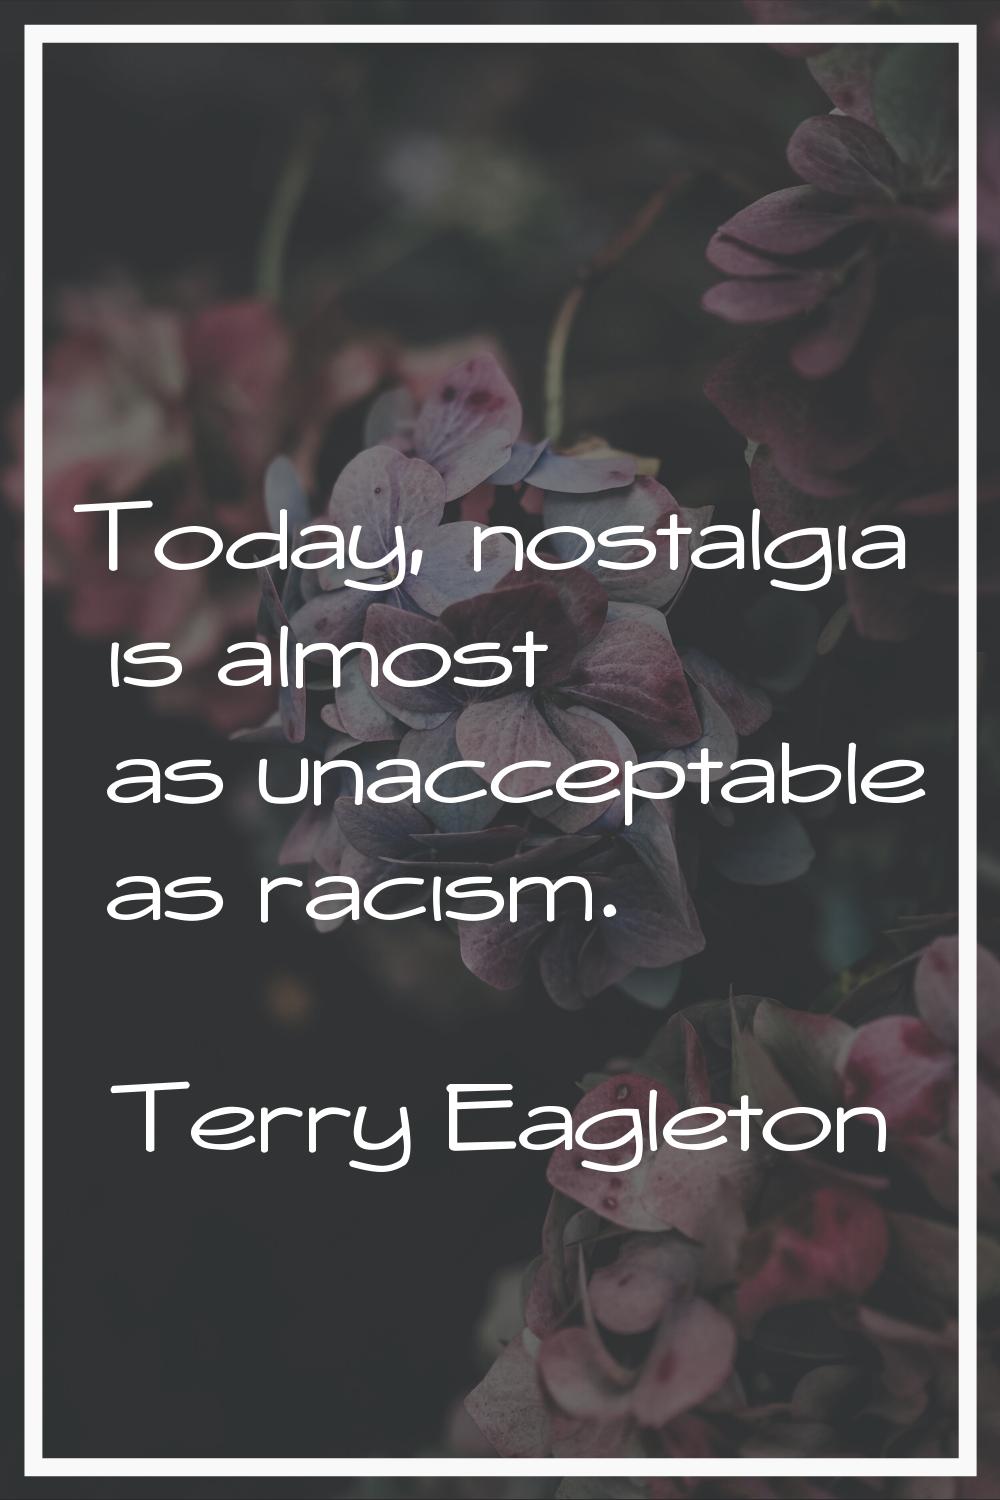 Today, nostalgia is almost as unacceptable as racism.